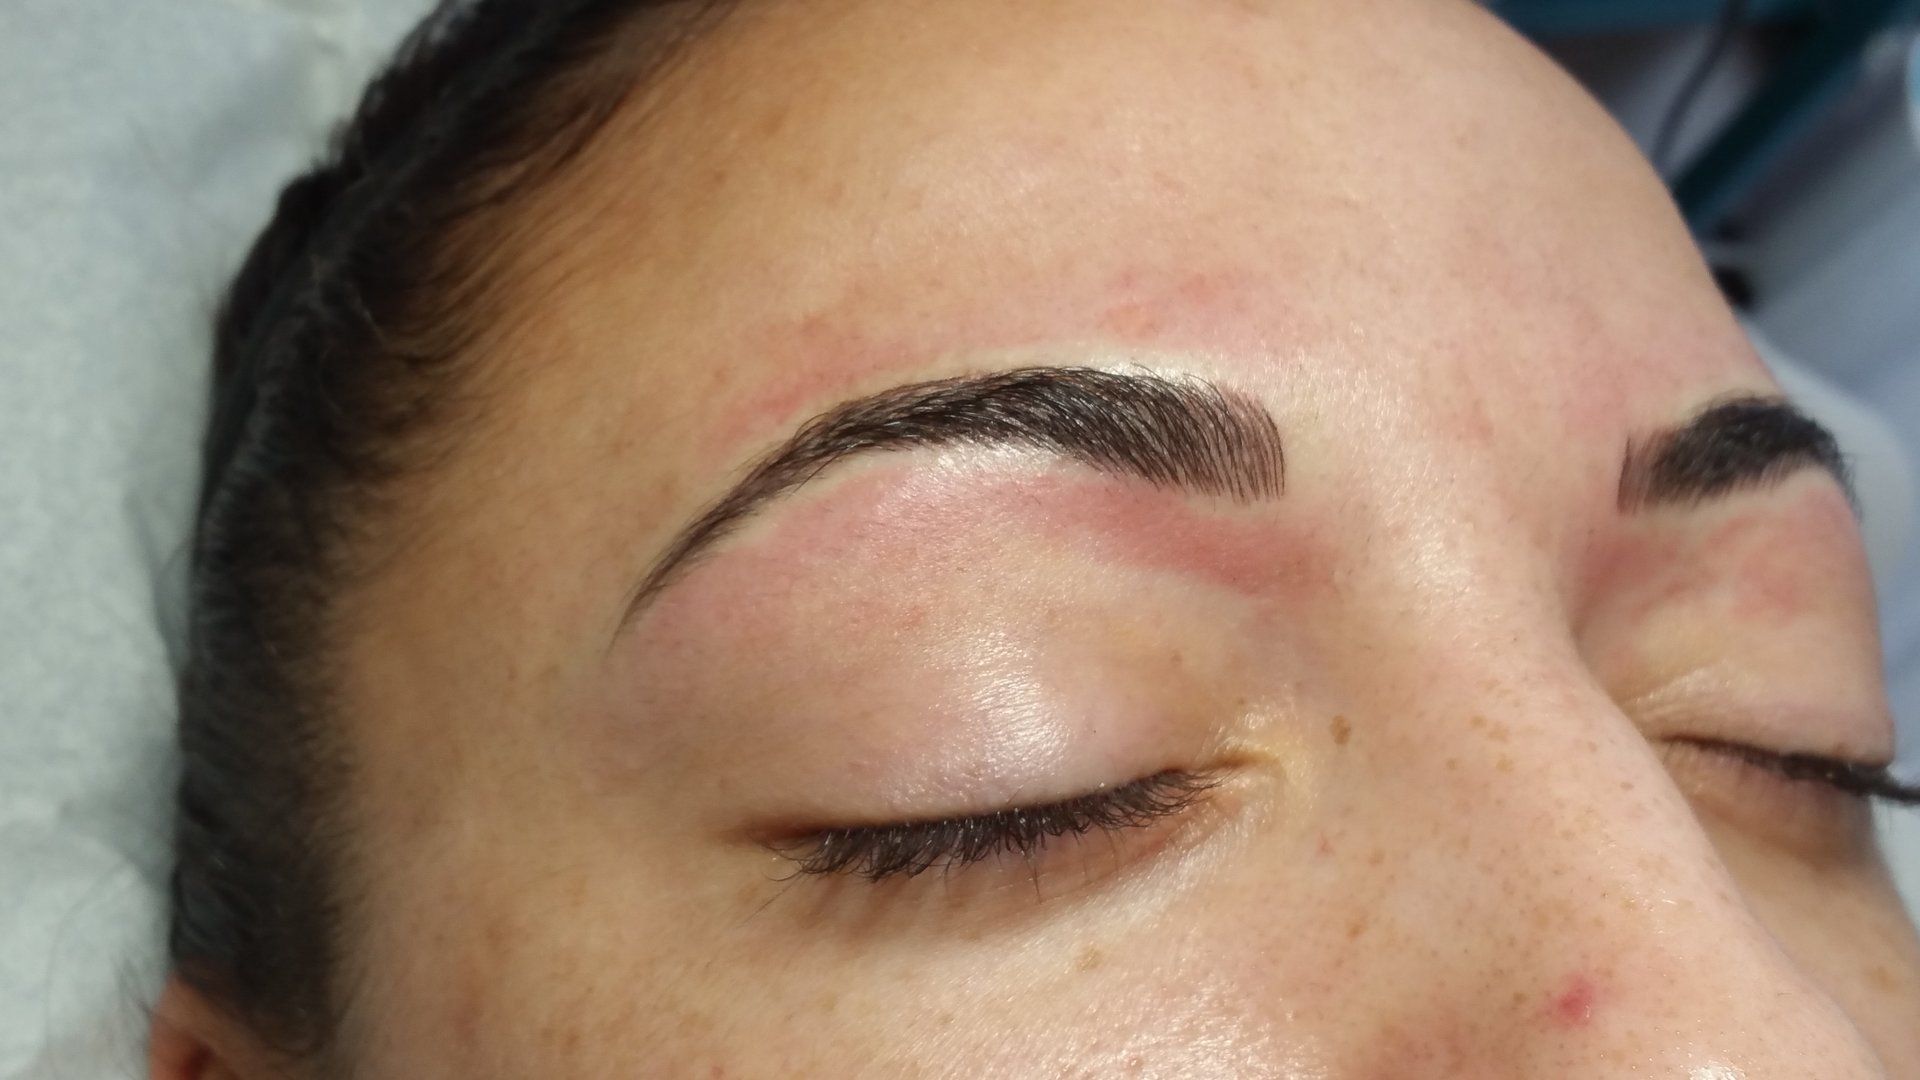 semi permanent makeup eyebrows microblading, lasts up to 18 months on most skin types